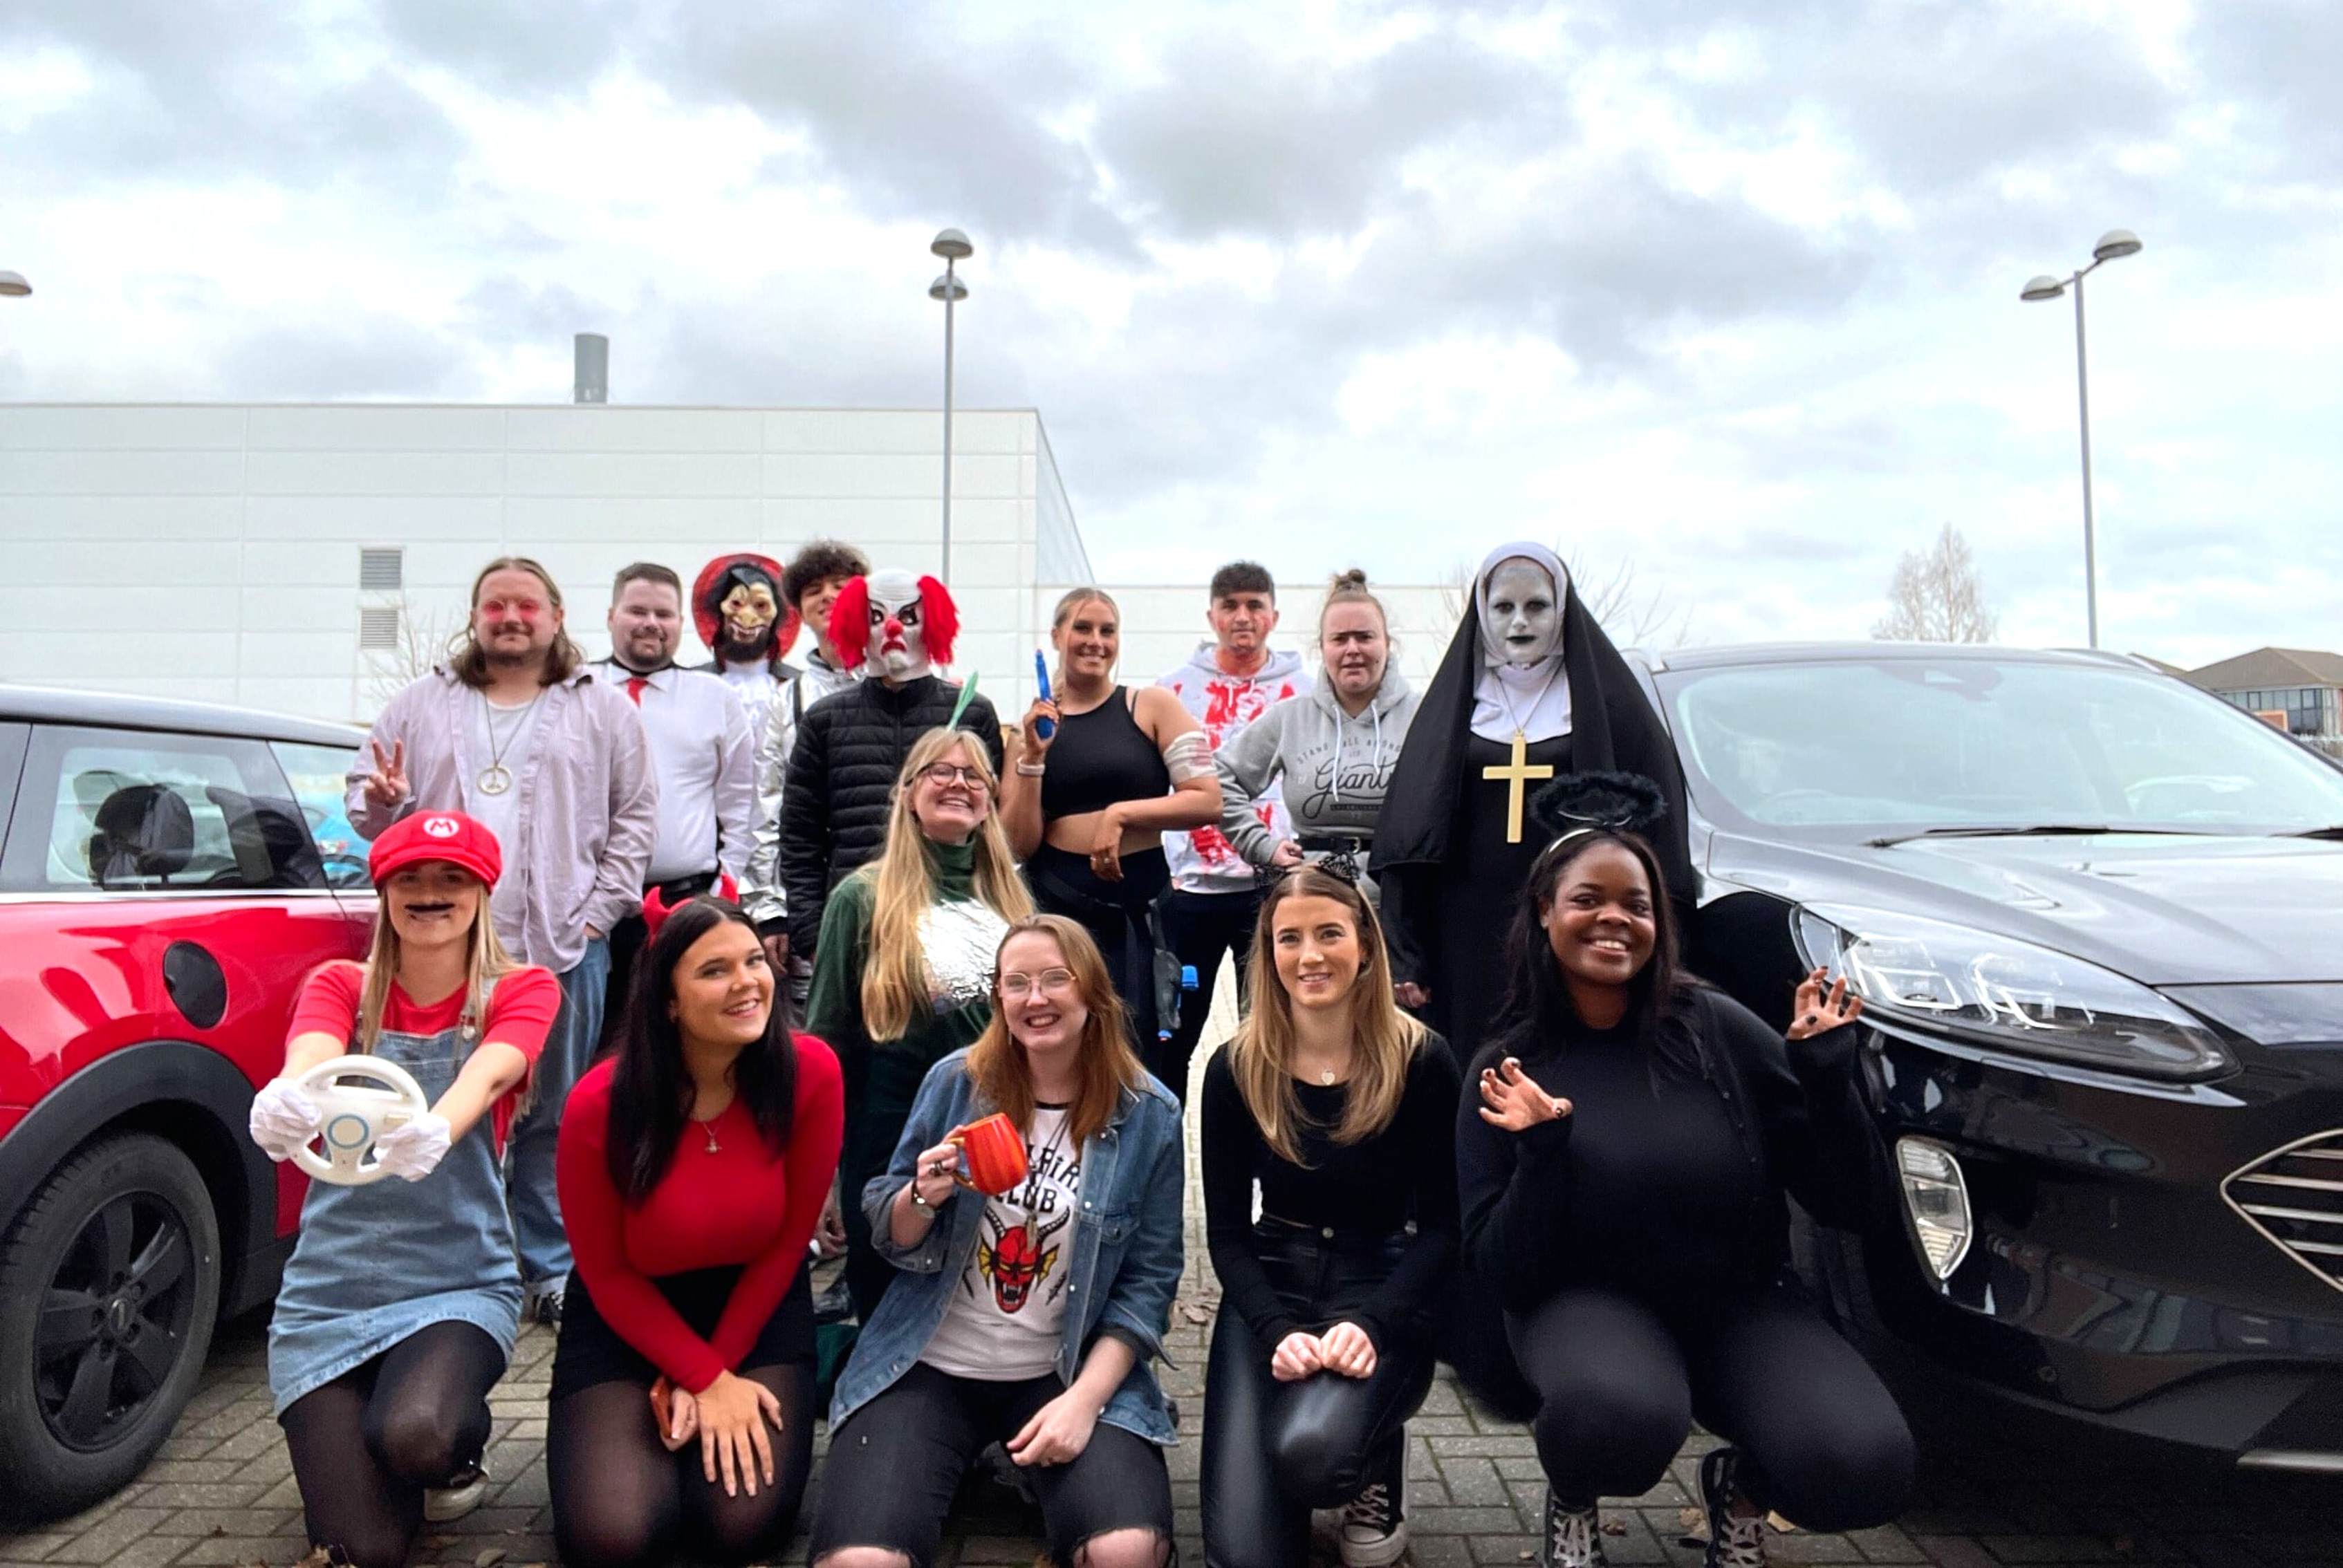 The JDR team grouped together in the car park in halloween costumes for Halloween dress up day at the office